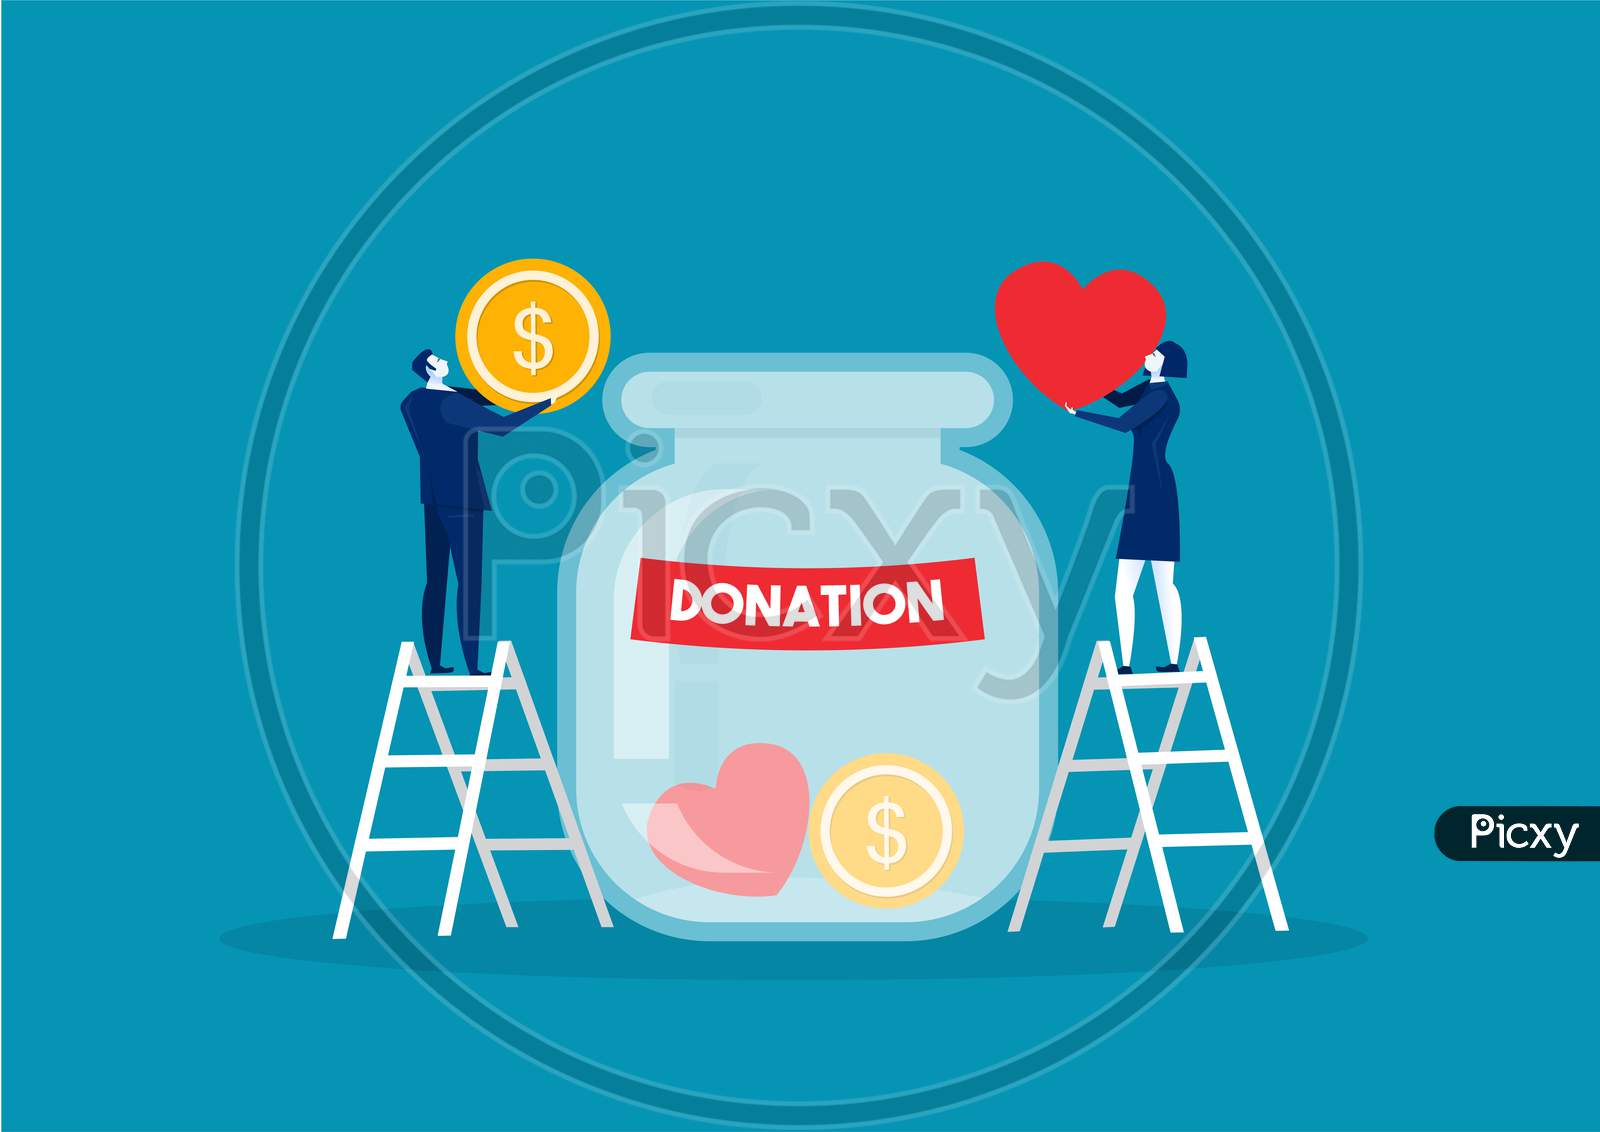 Donation Bottle With Golden Coins And Dollar Banknotes. Charity, Donate Help And Aid Concept. Vector Illustration